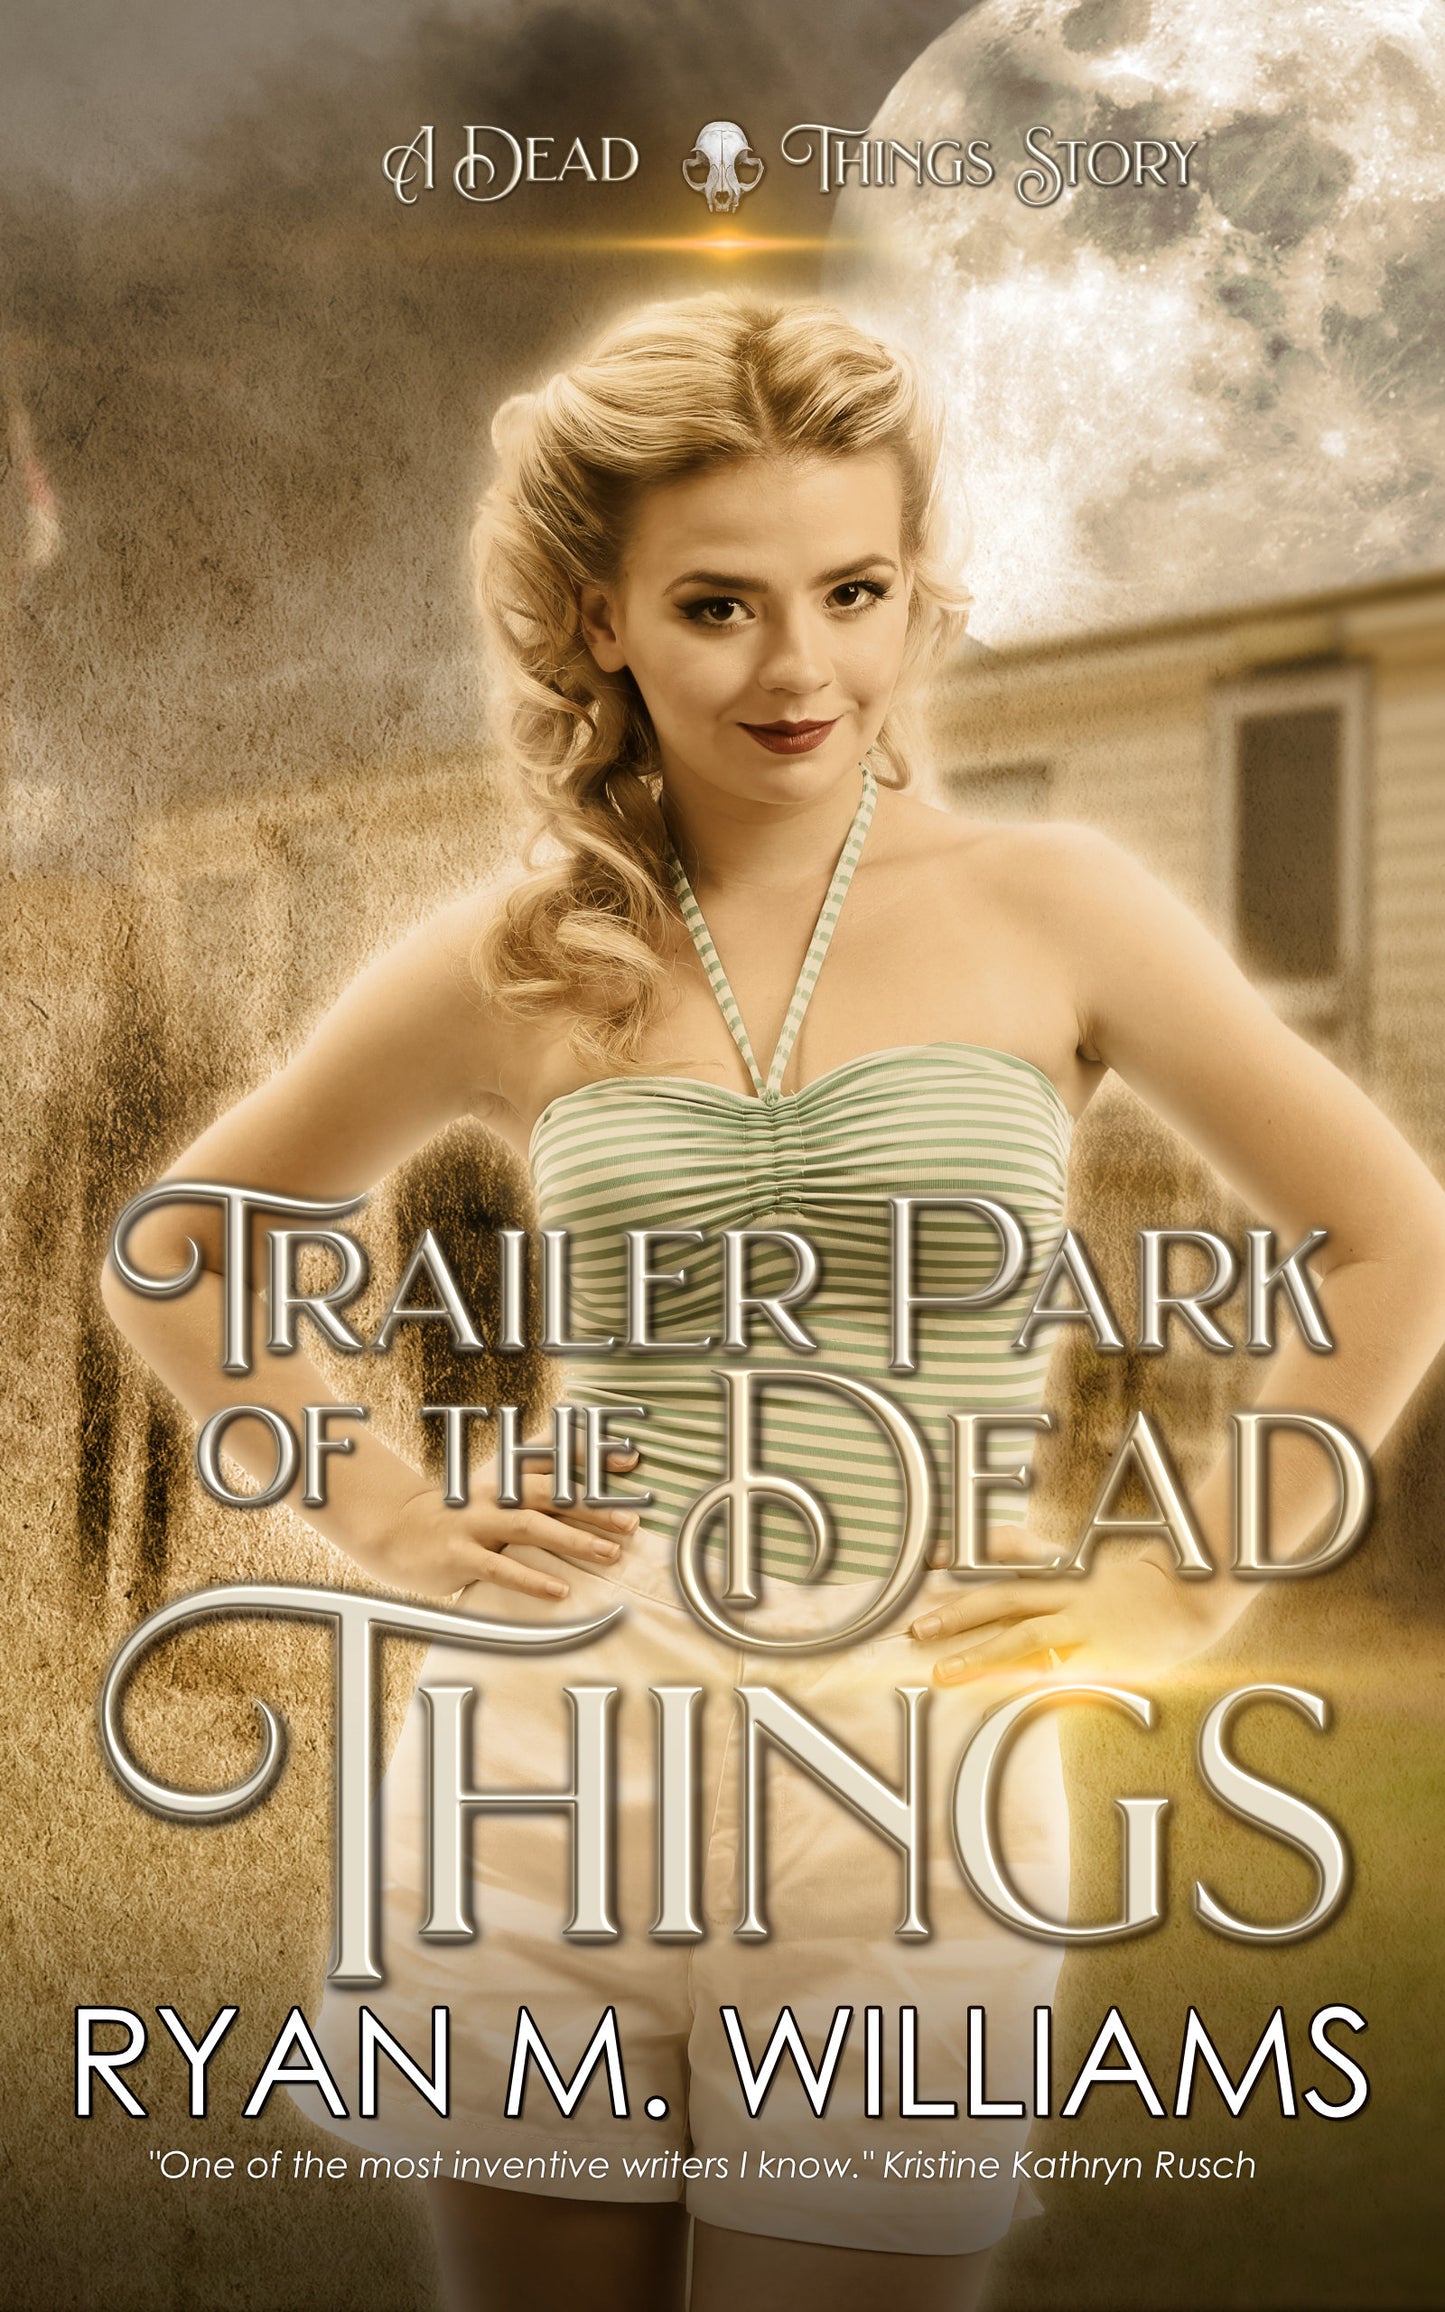 Trailer Park of the Dead Things